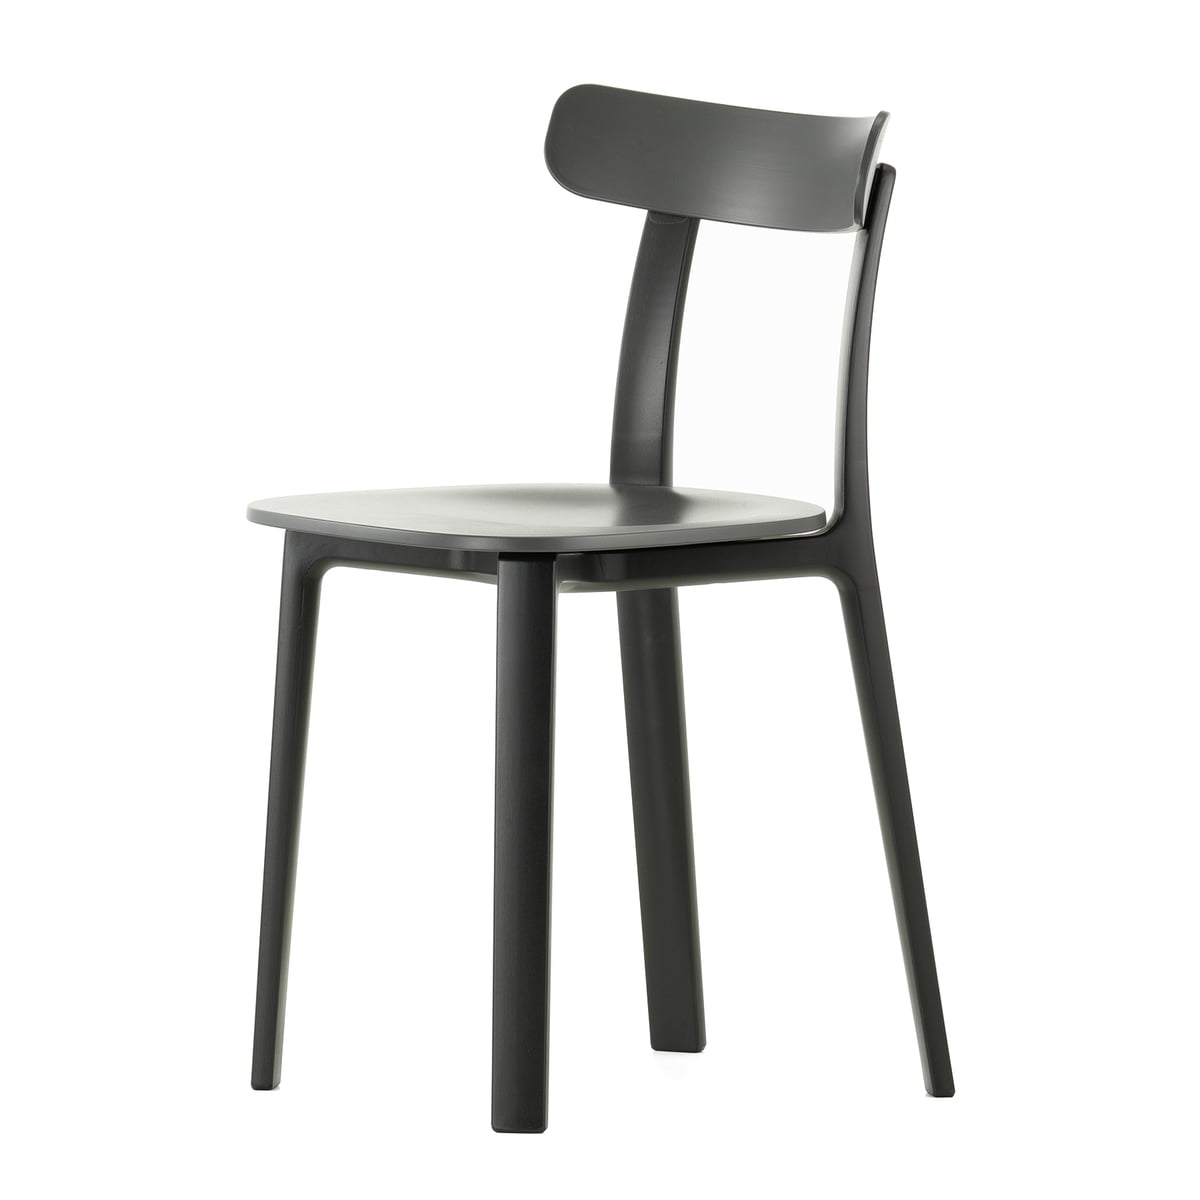 All Plastic Chair By Vitra Online Shop Connox